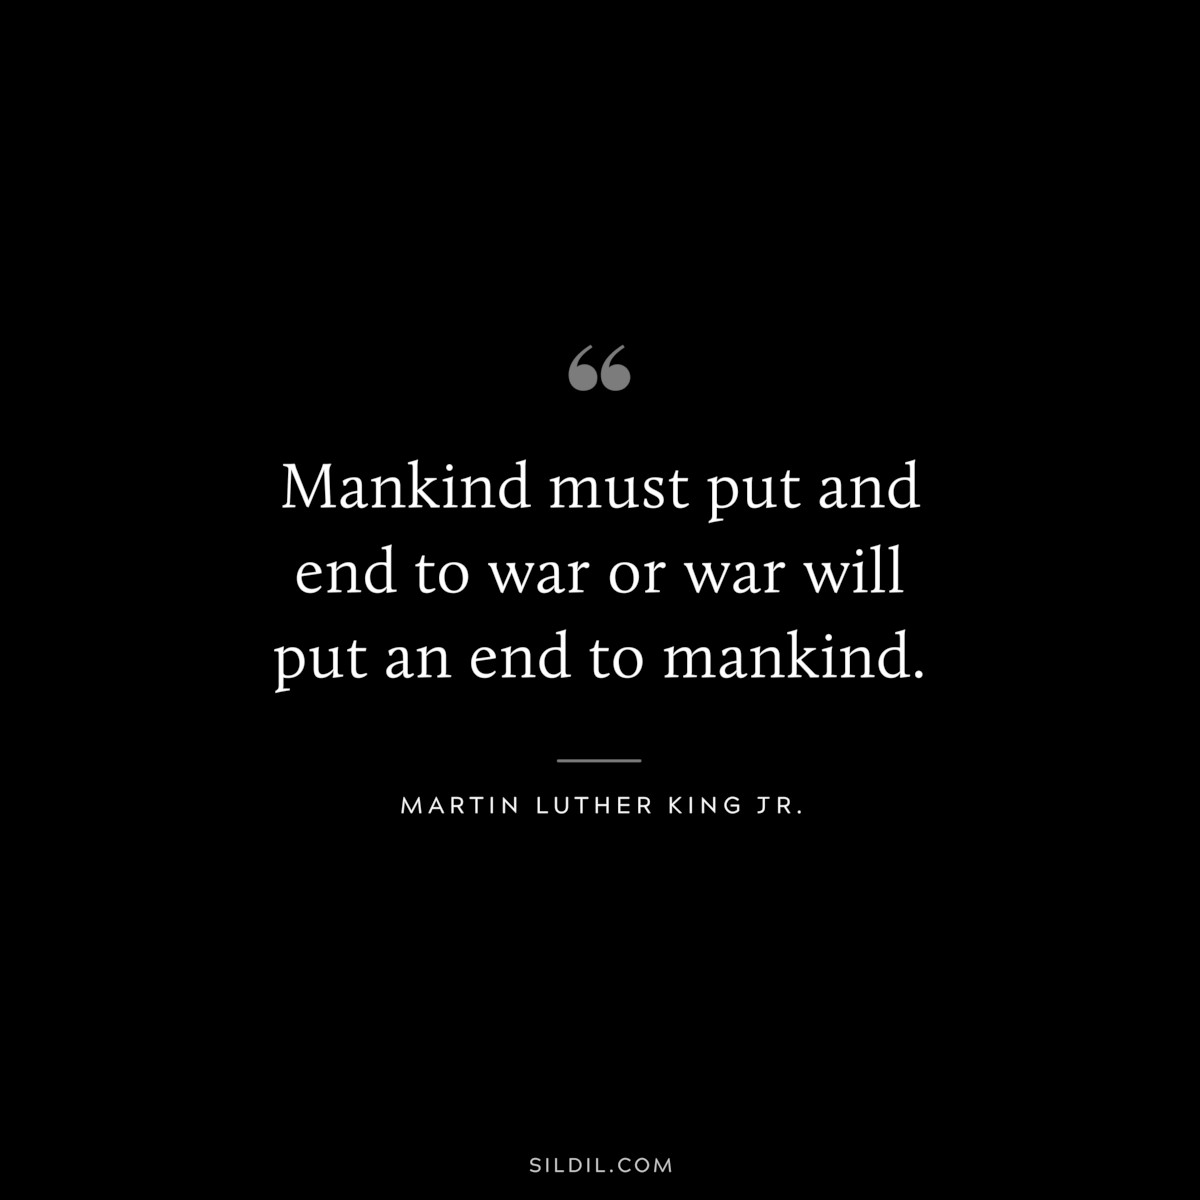 Mankind must put and end to war or war will put an end to mankind. ― Martin Luther King Jr.